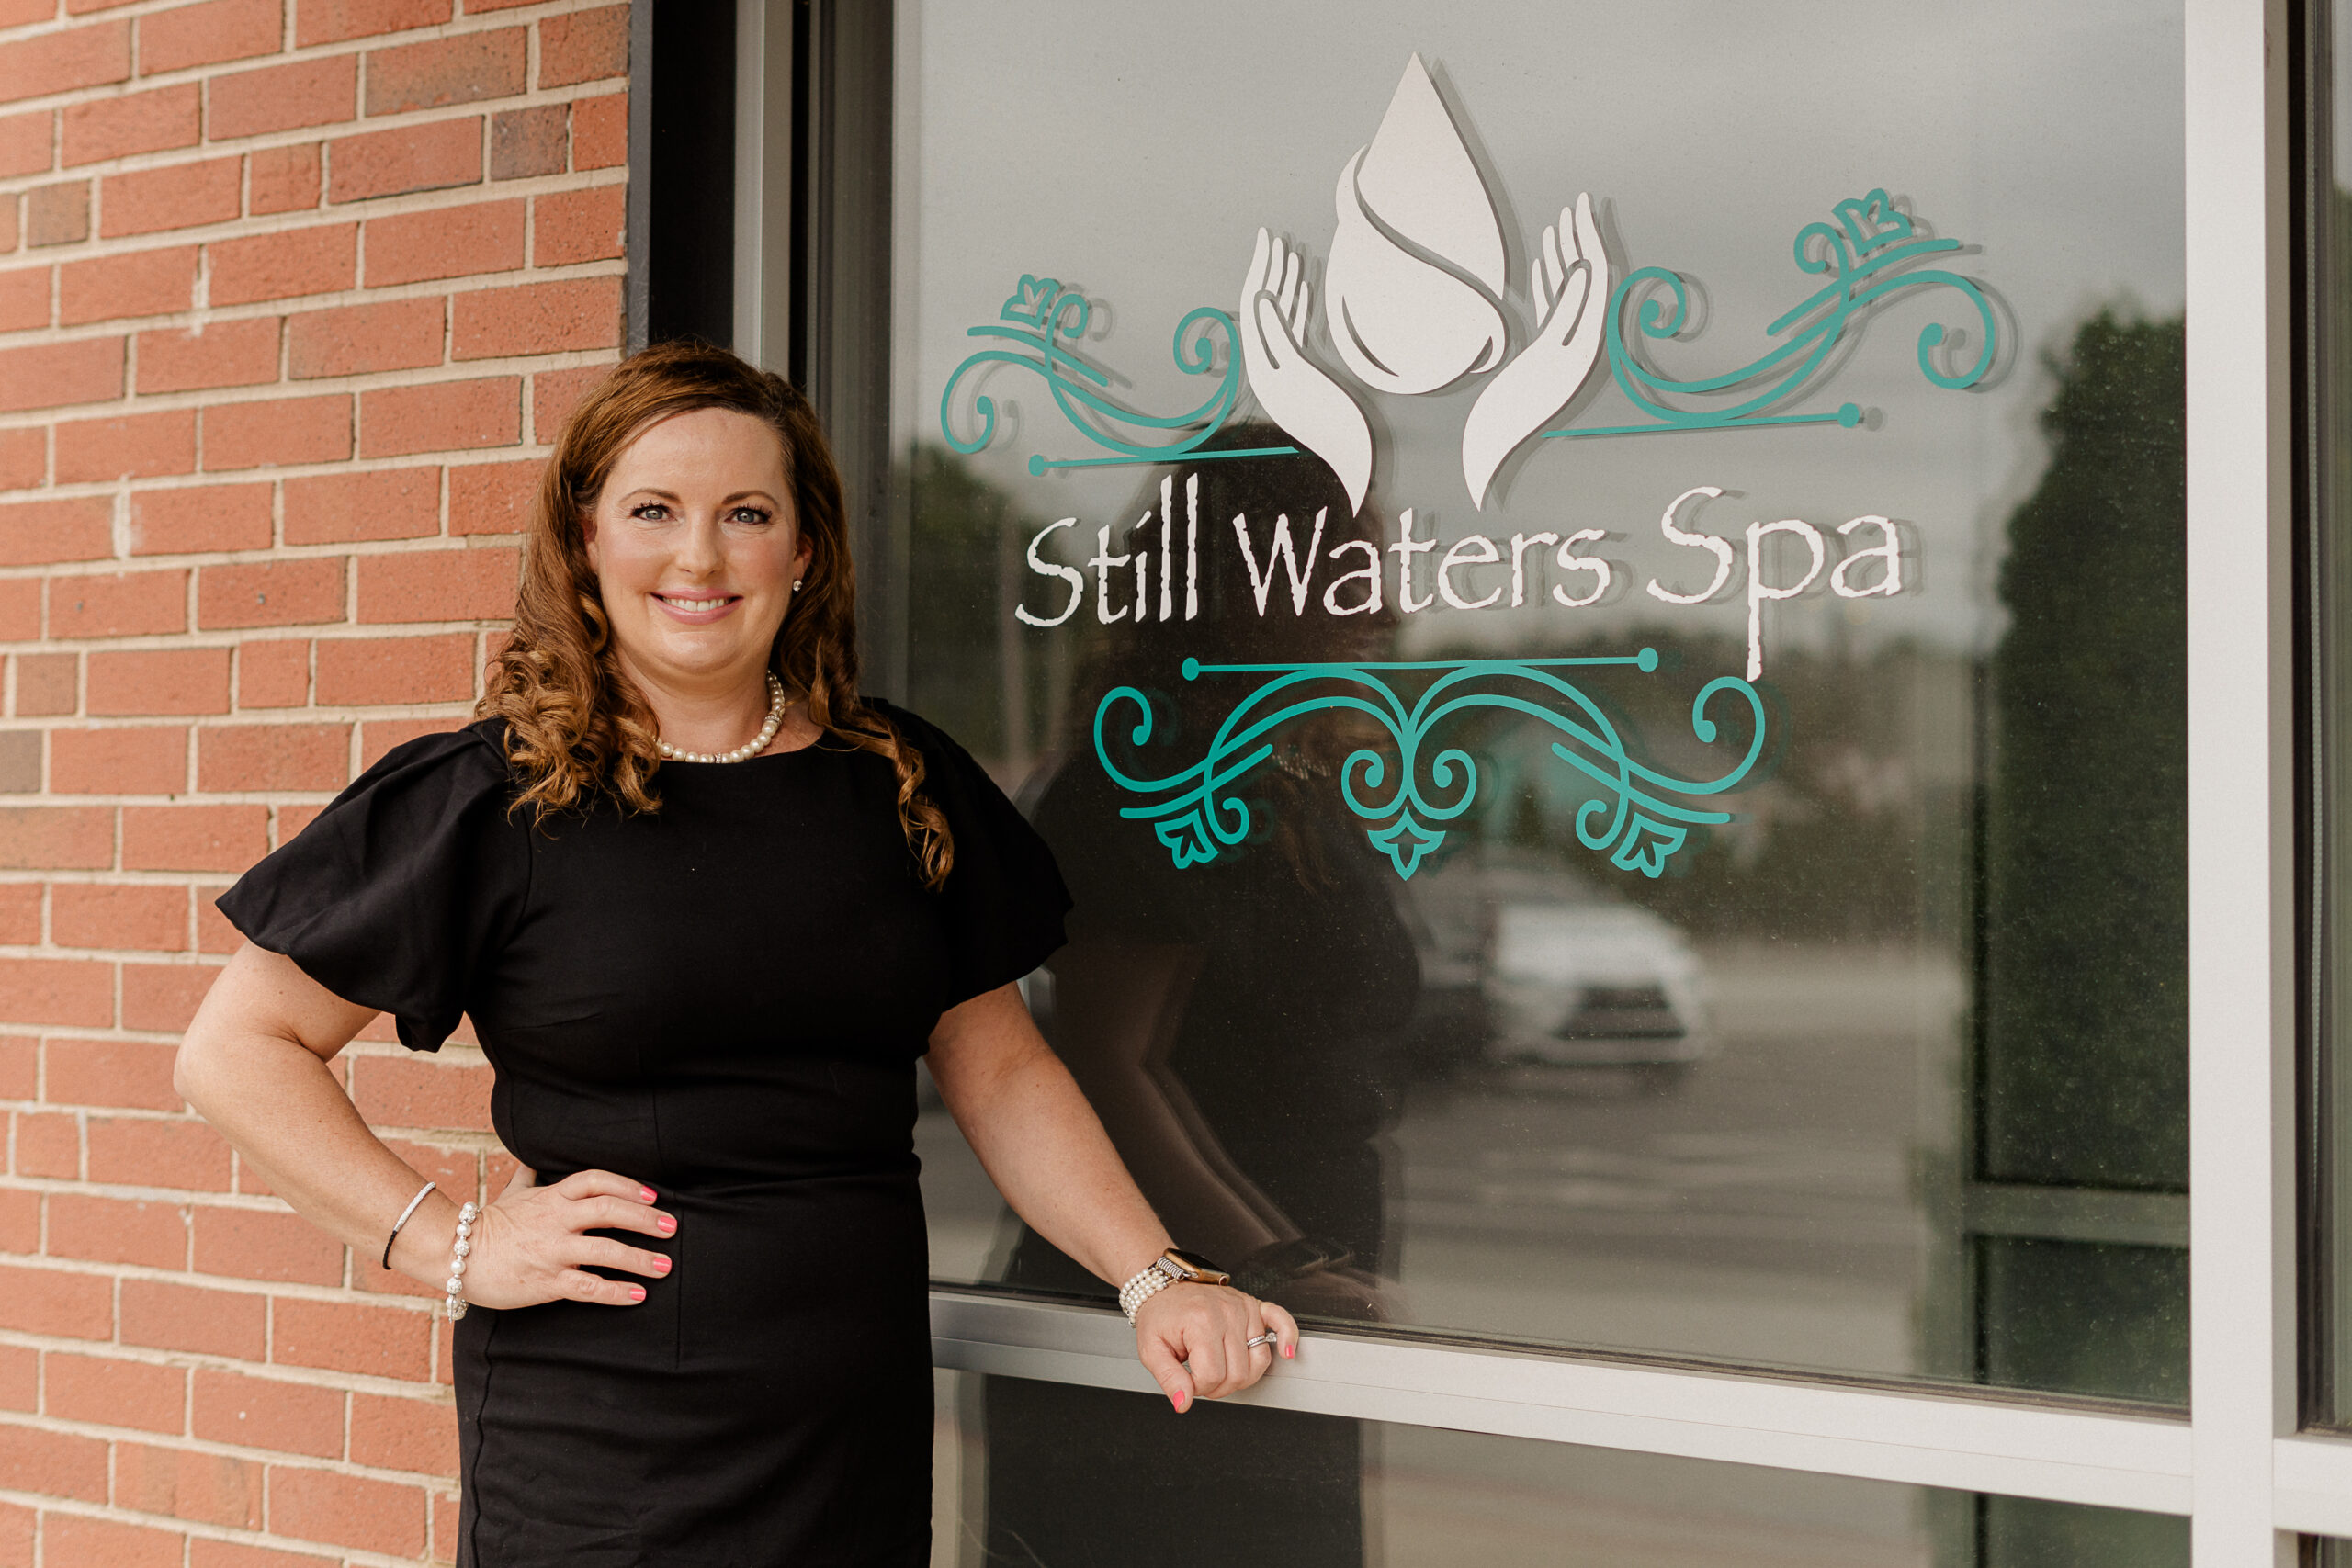 Tara Lackey poses for a picture in front of Still Waters Spa.